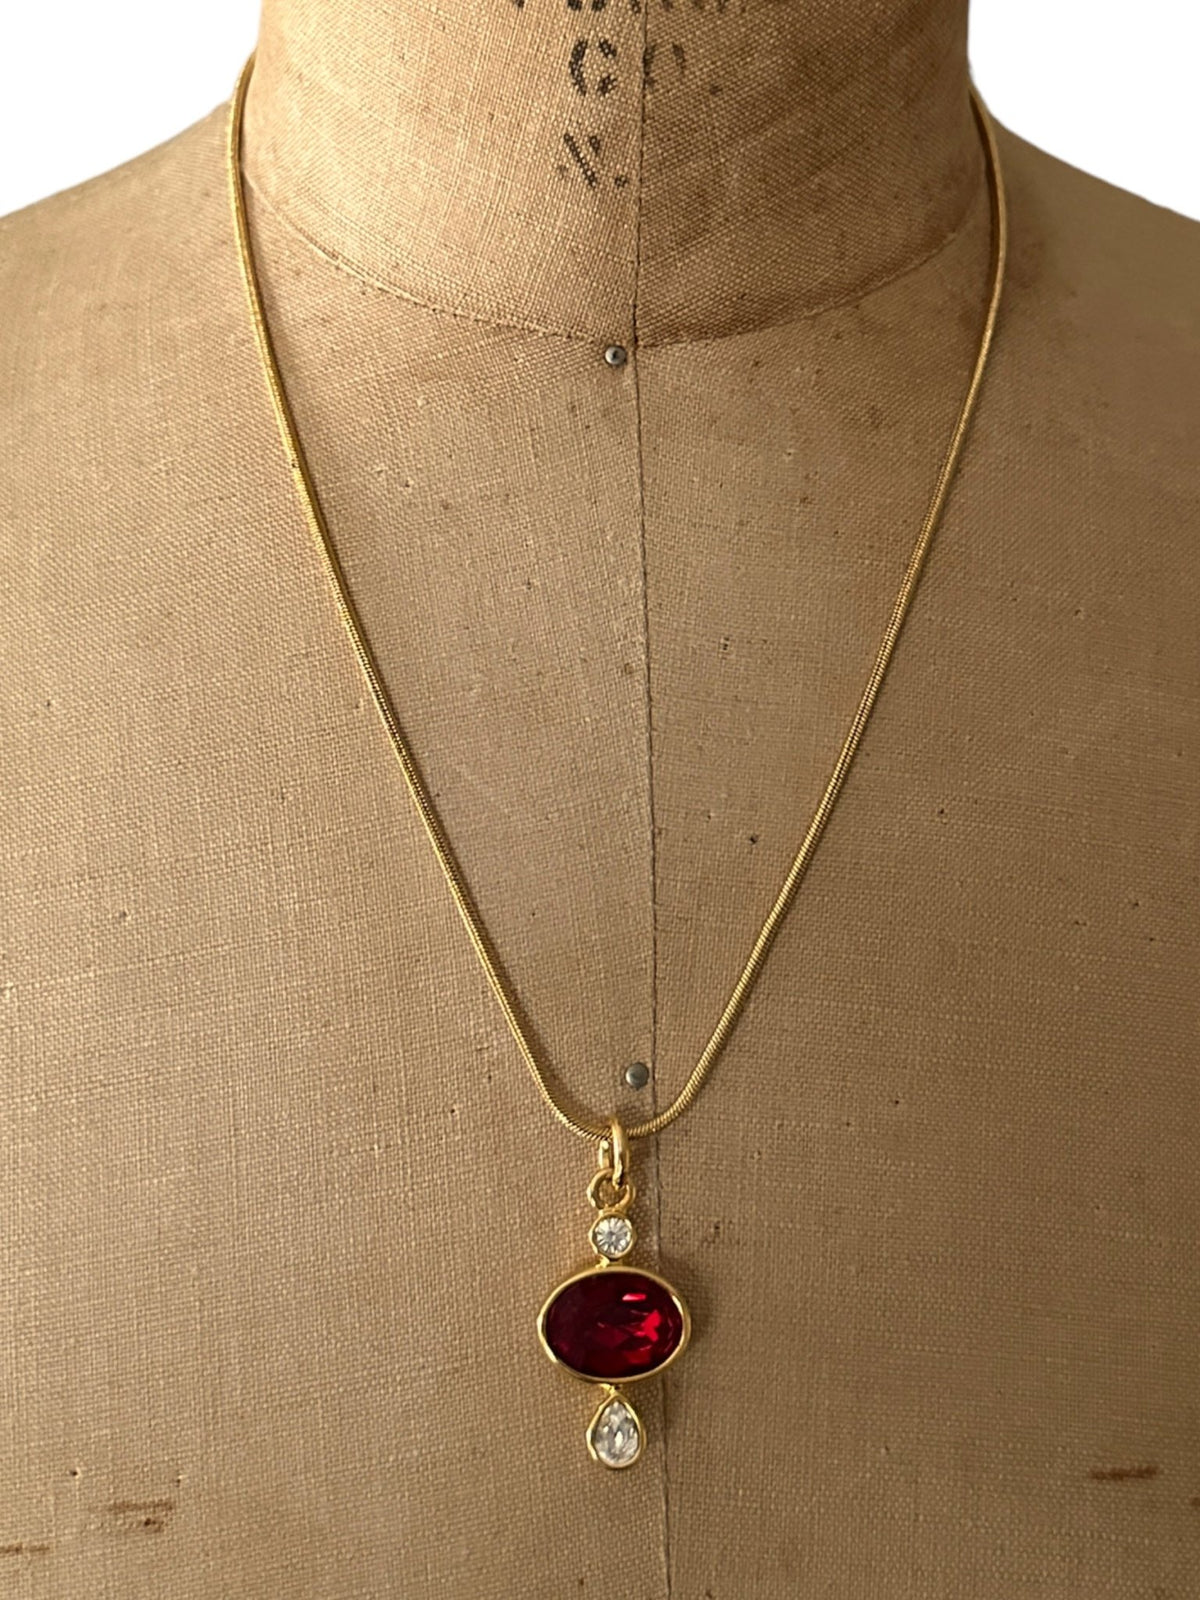 Gold Joan Rivers Red Oval Rhinestone Pendant - 24 Wishes Vintage Jewelry